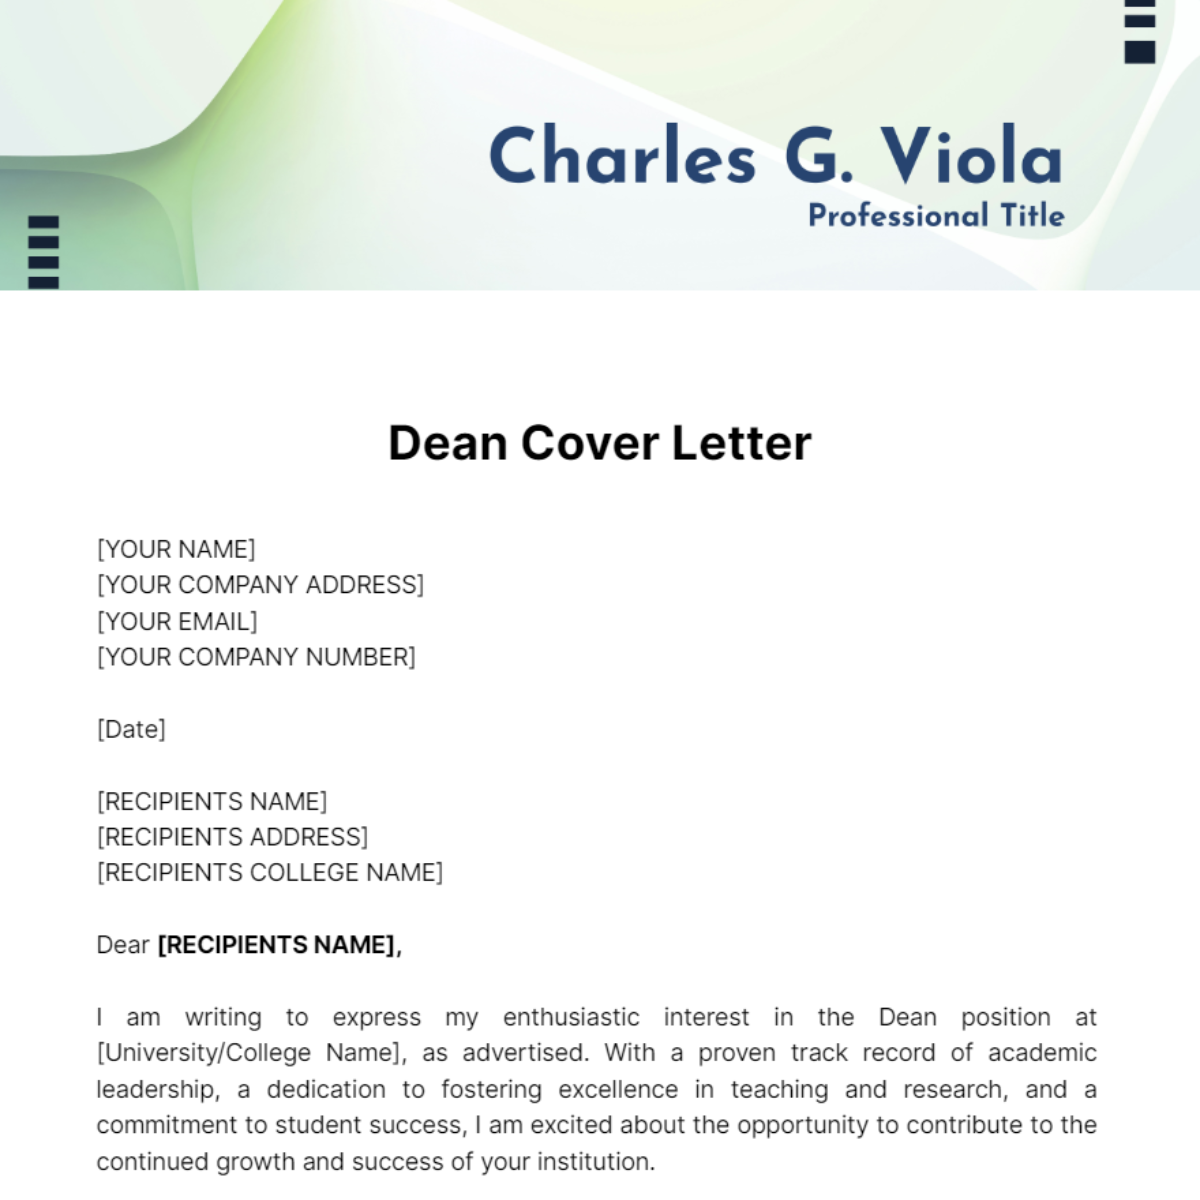 Dean Cover Letter Template